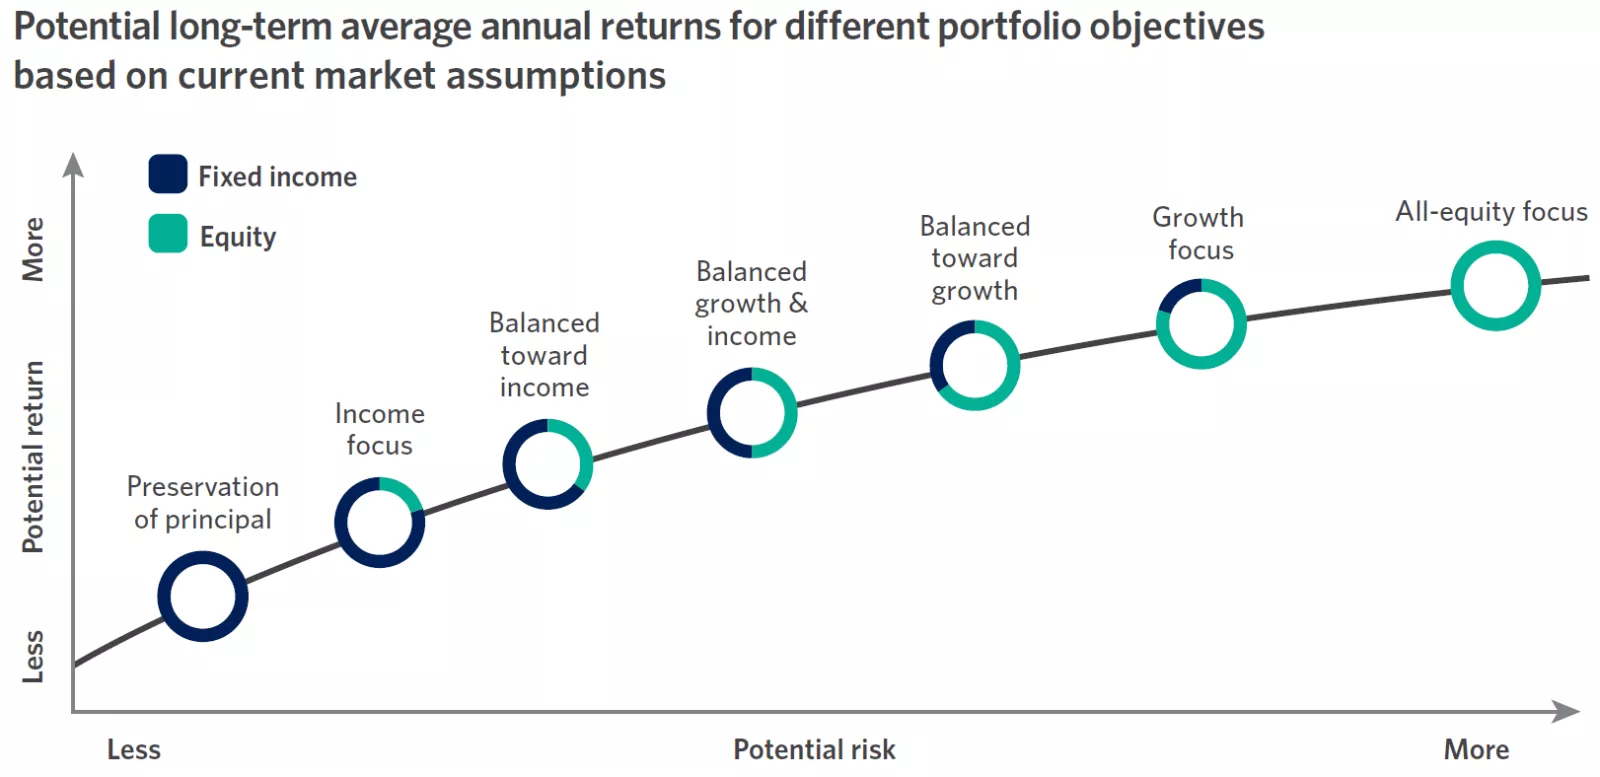  chart showing the potential long-term average annual returns for different portfolio objectives based on our current market assumptions.
